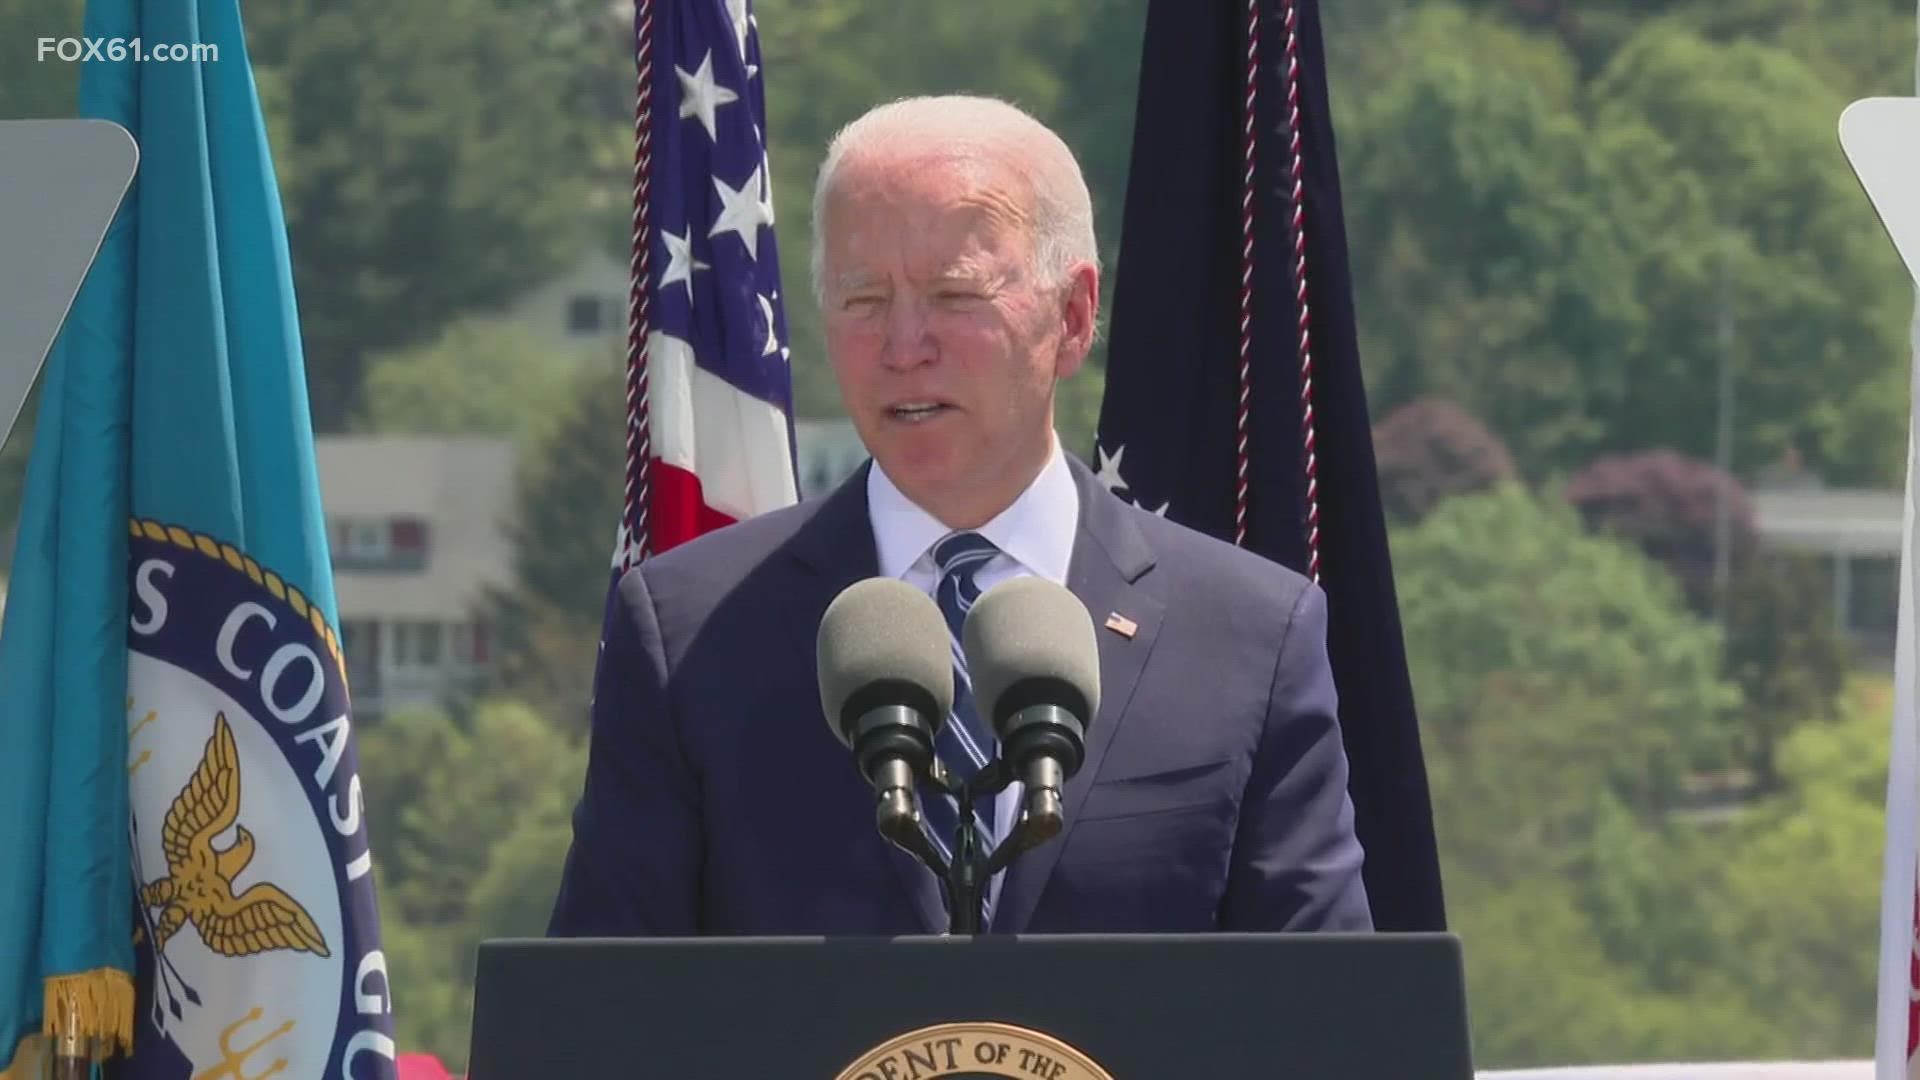 Biden last addressed a graduating class at the Academy as vice-president in 2013.